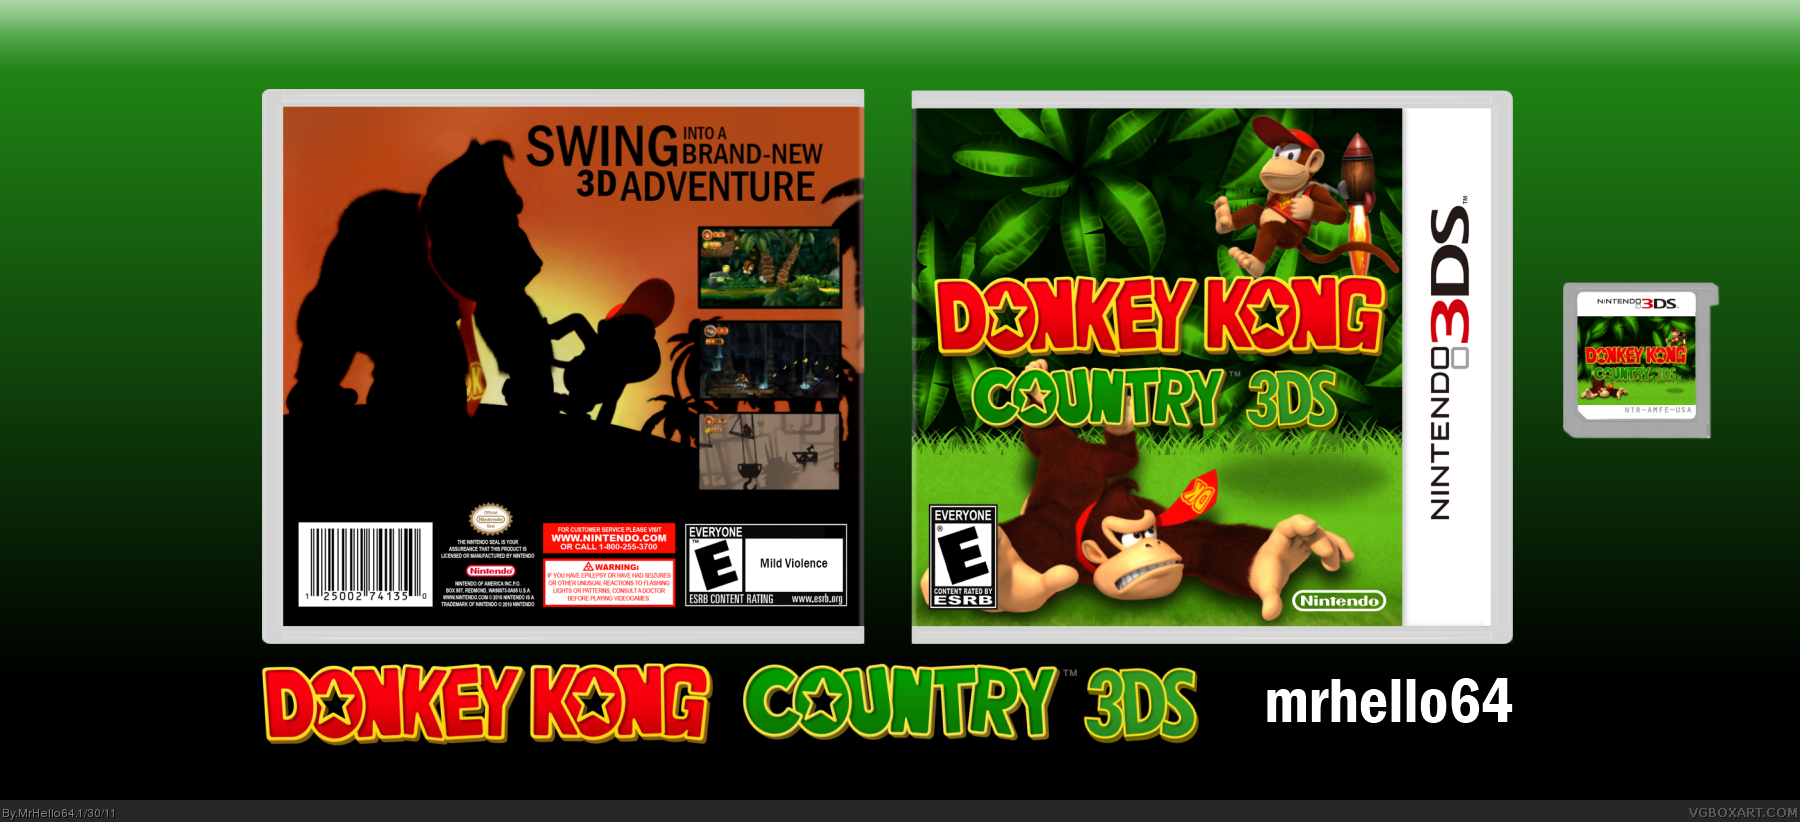 Donkey Kong Country 3DS box cover